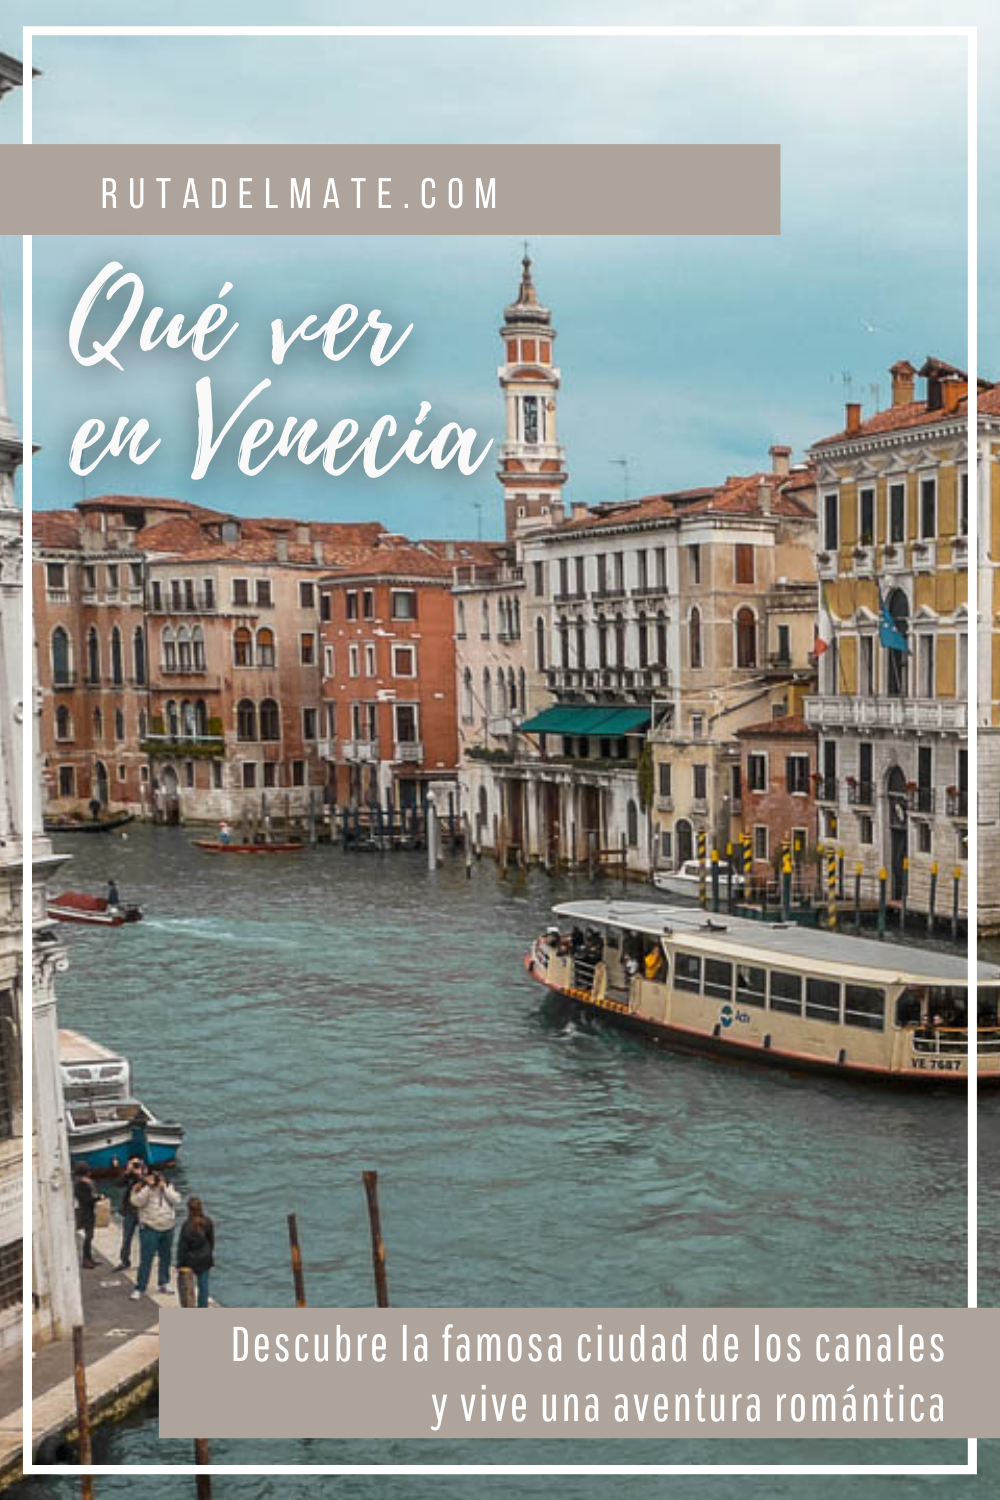 Things to do in and around Venice